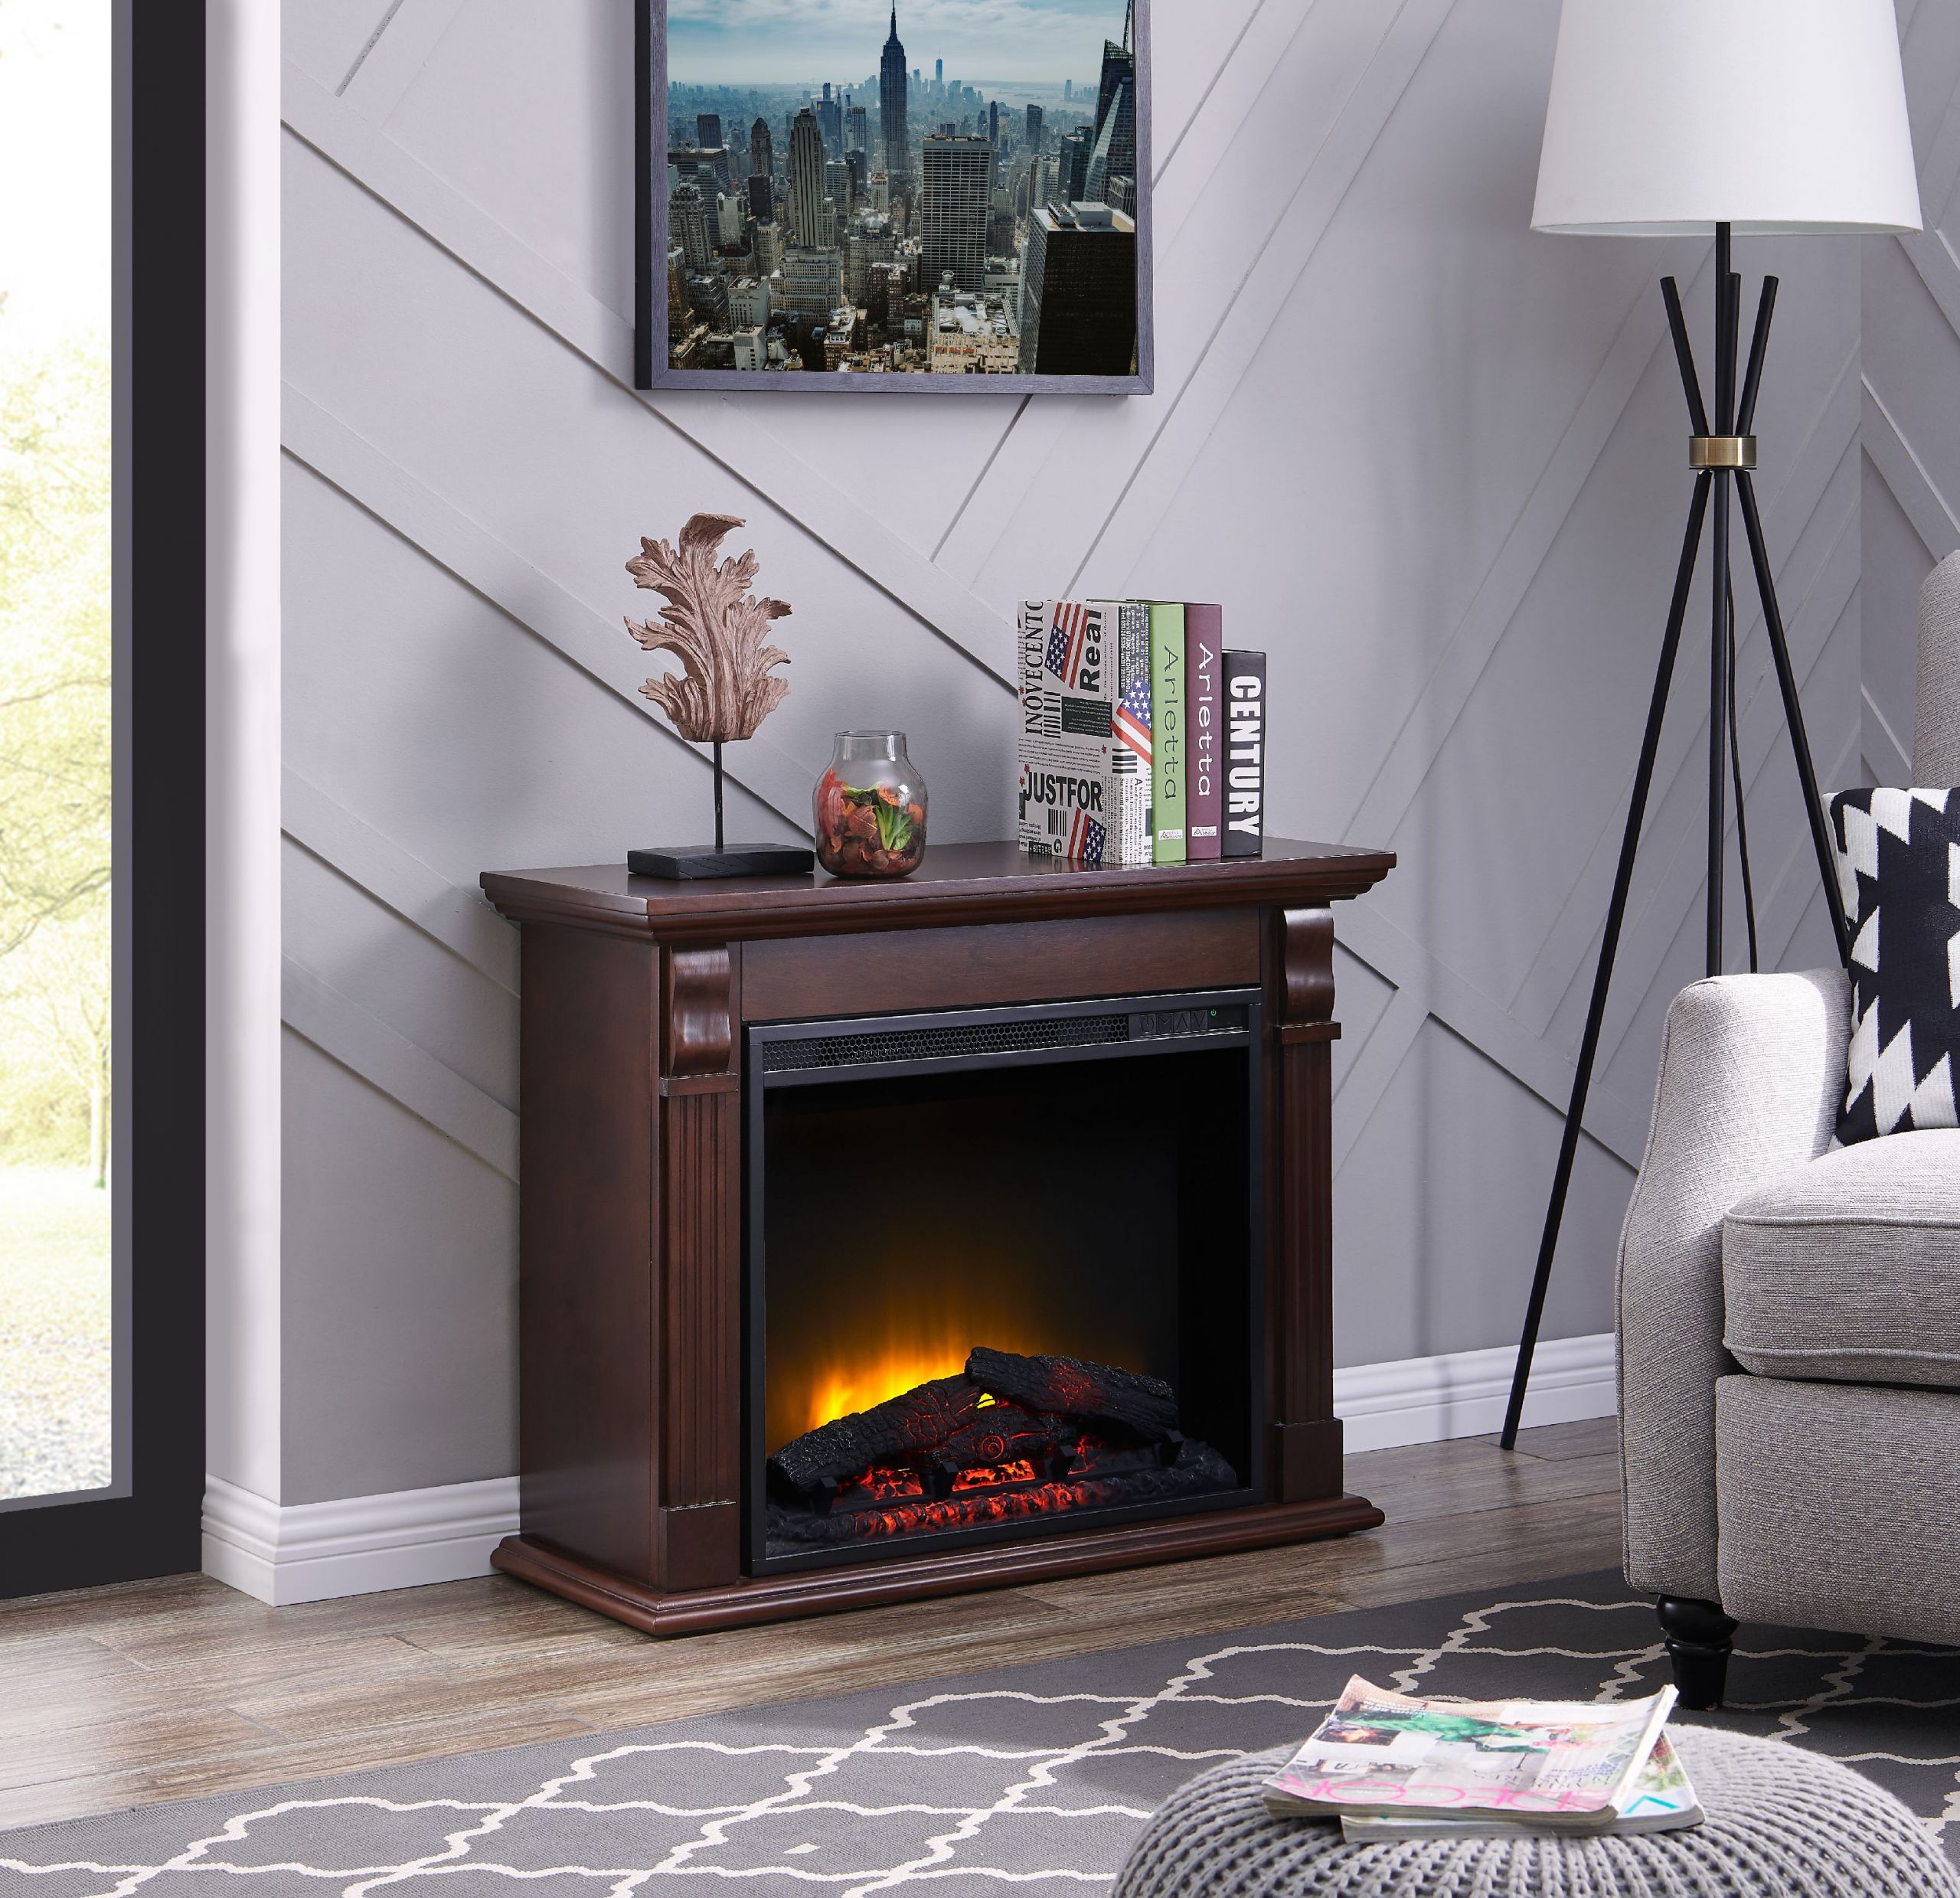 Tv Fireplace Wall Unit Designs New Bold Flame 33 46 Inch Electric Fireplace In Chestnut Walmart